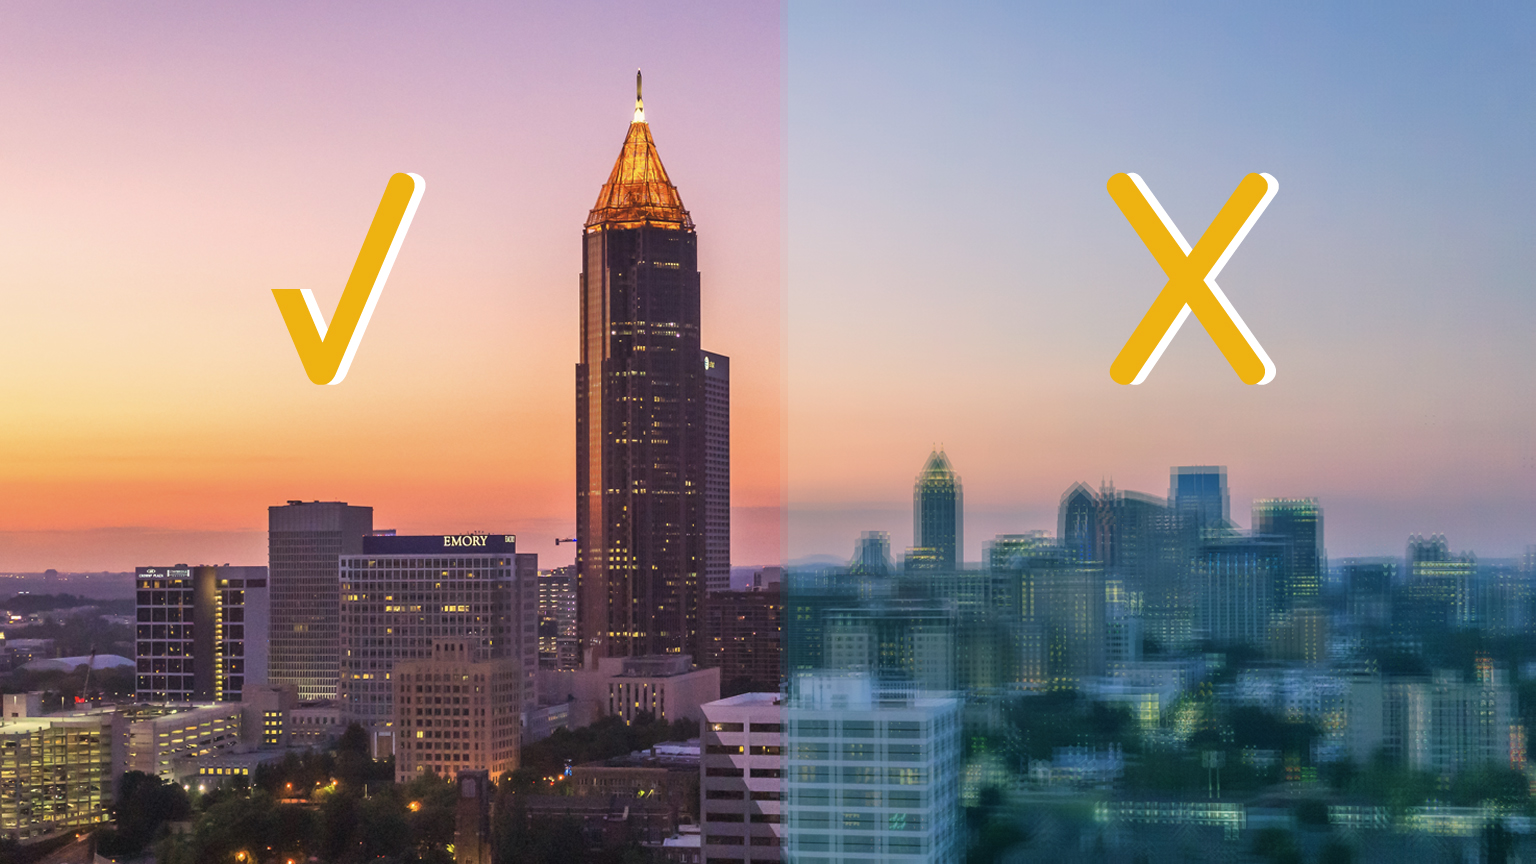 The Atlanta skyline shown in full resolution and pixelated, with an X and a check mark over the two images.